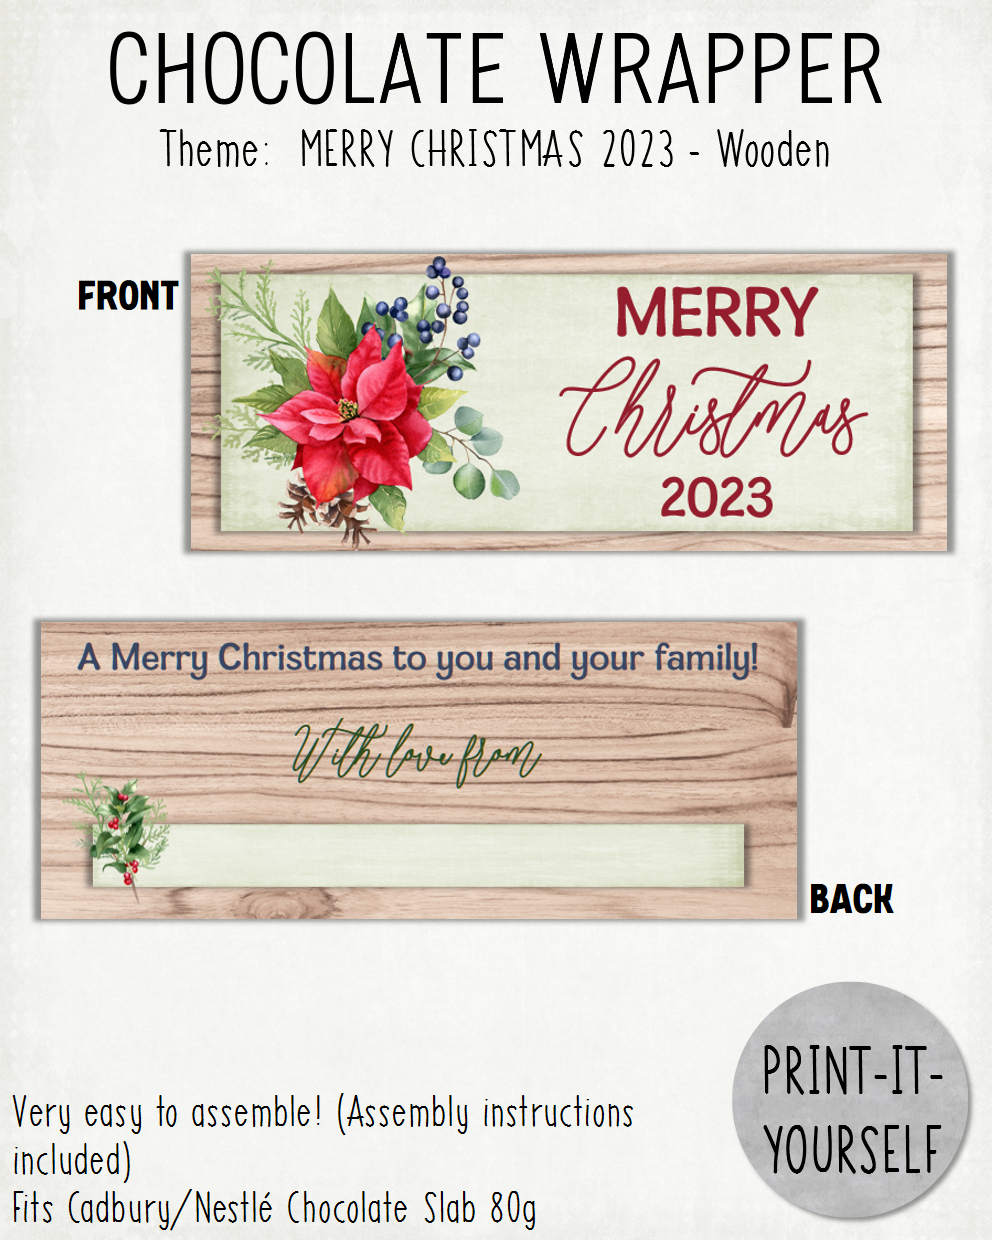 READY TO PRINT:  Merry Christmas 2023 Chocolate Wrapper - Wooden